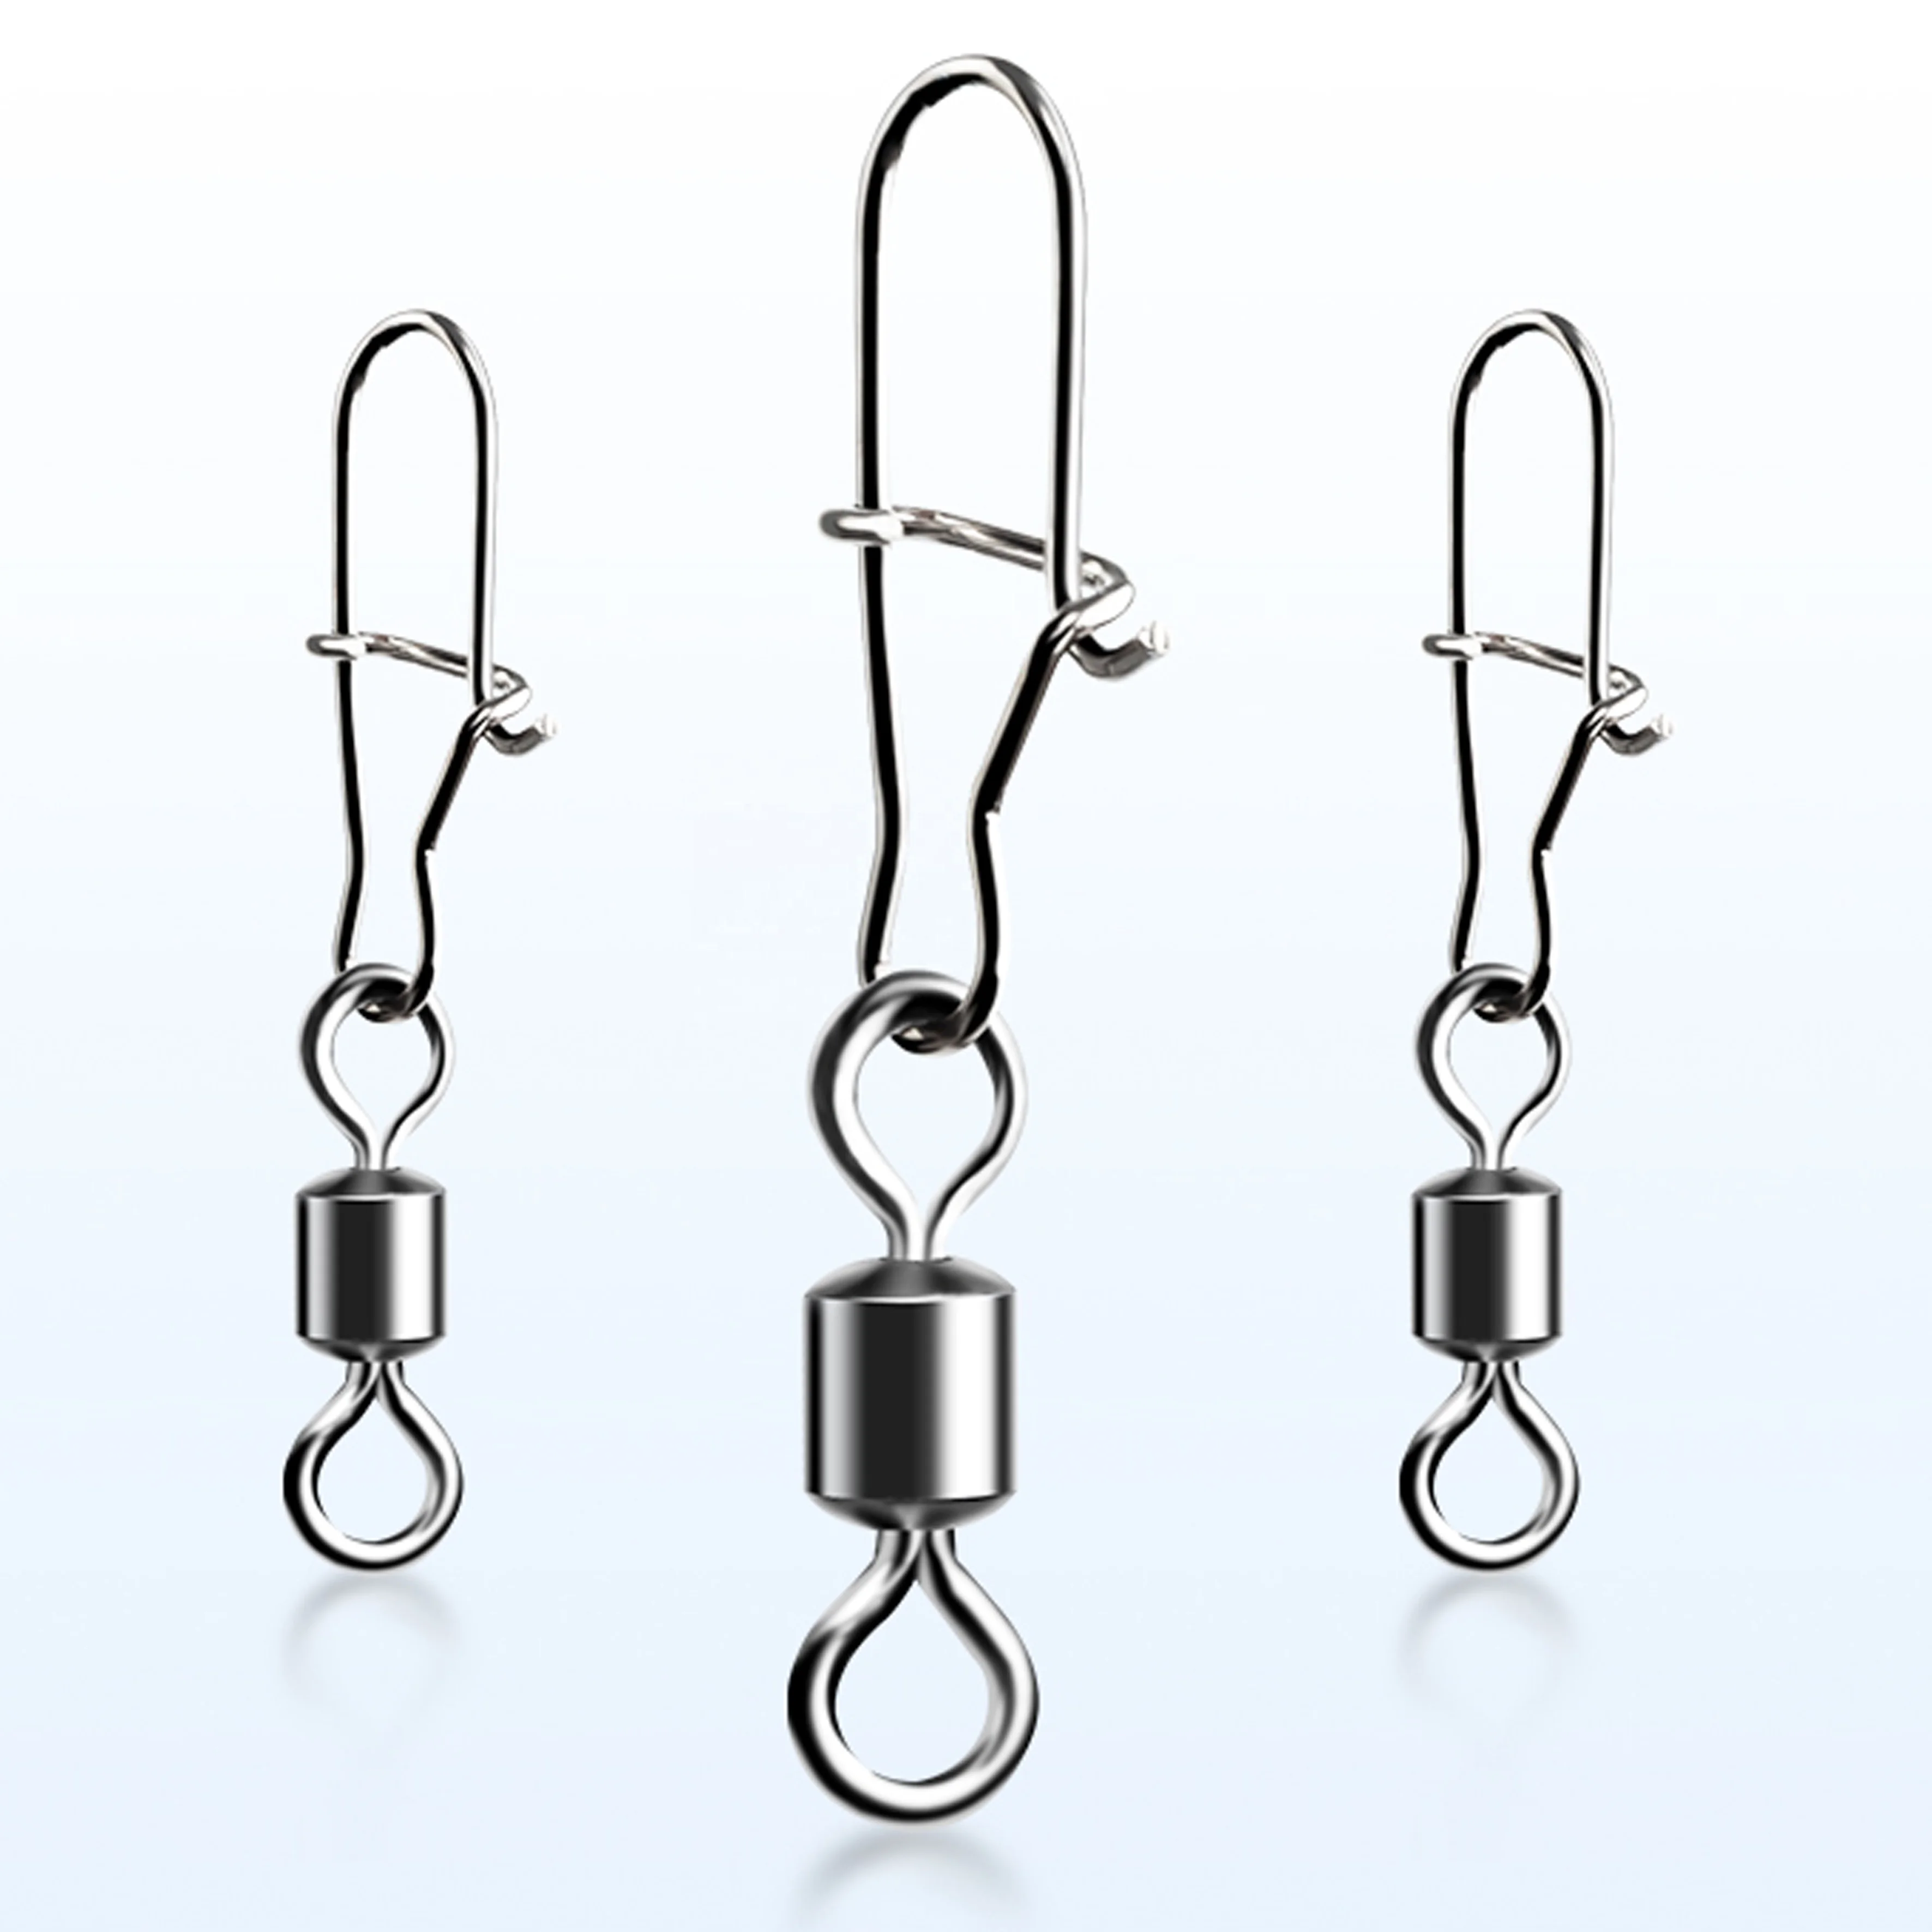 

Stainless Steel Fishing Rolling Swivel with Nice Snap Connector Fishing Tackle Accessory